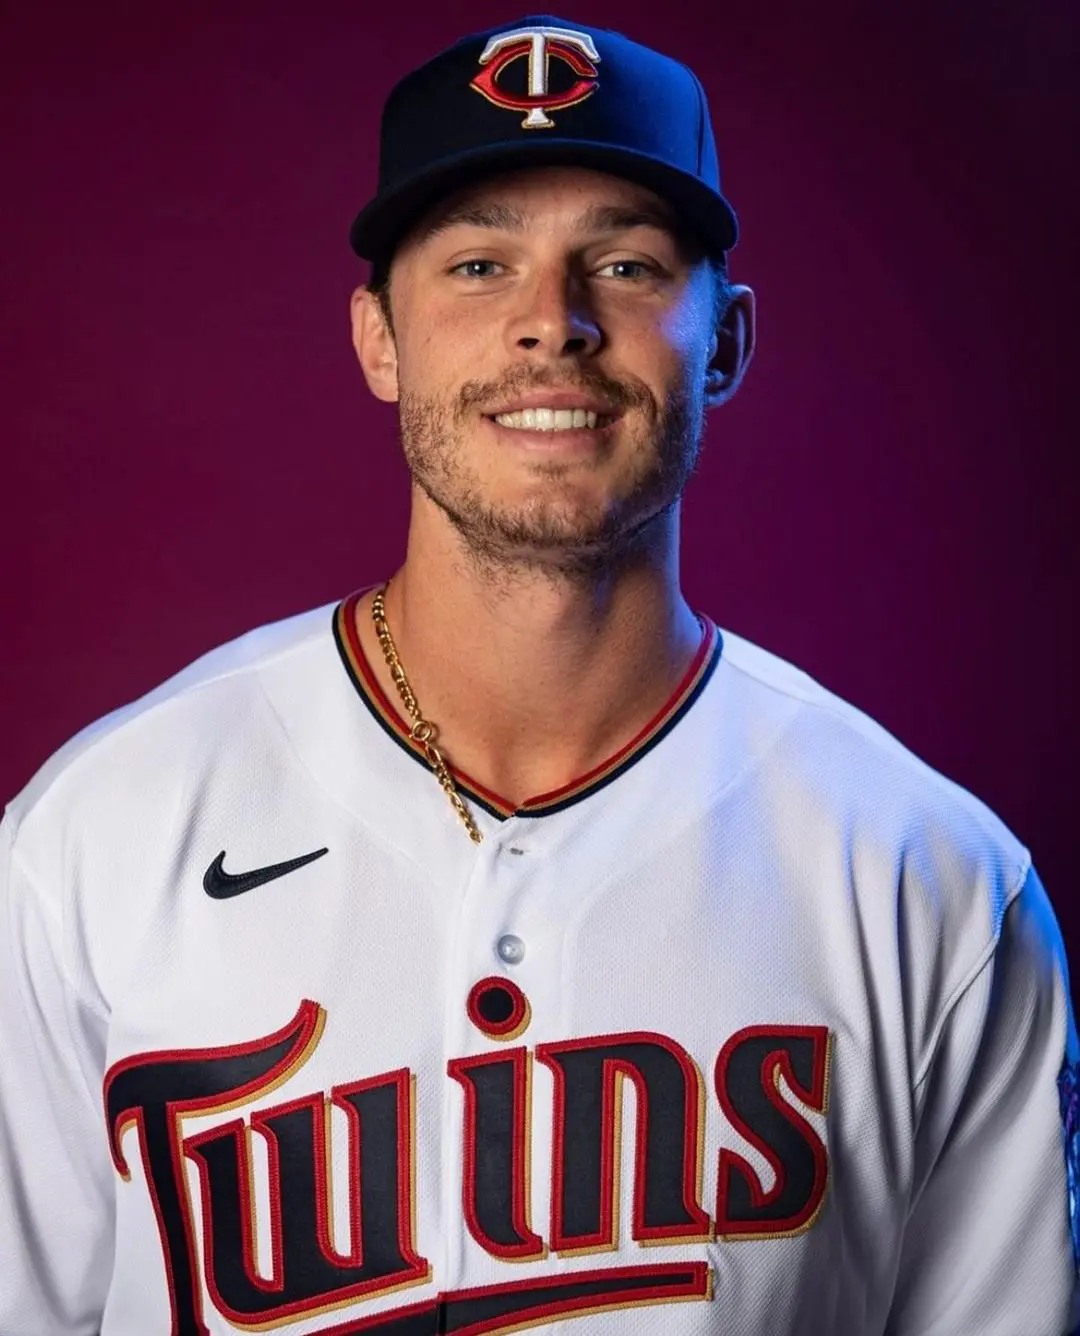 Max Kepler has been with the Minnesota Twins since the beginning 